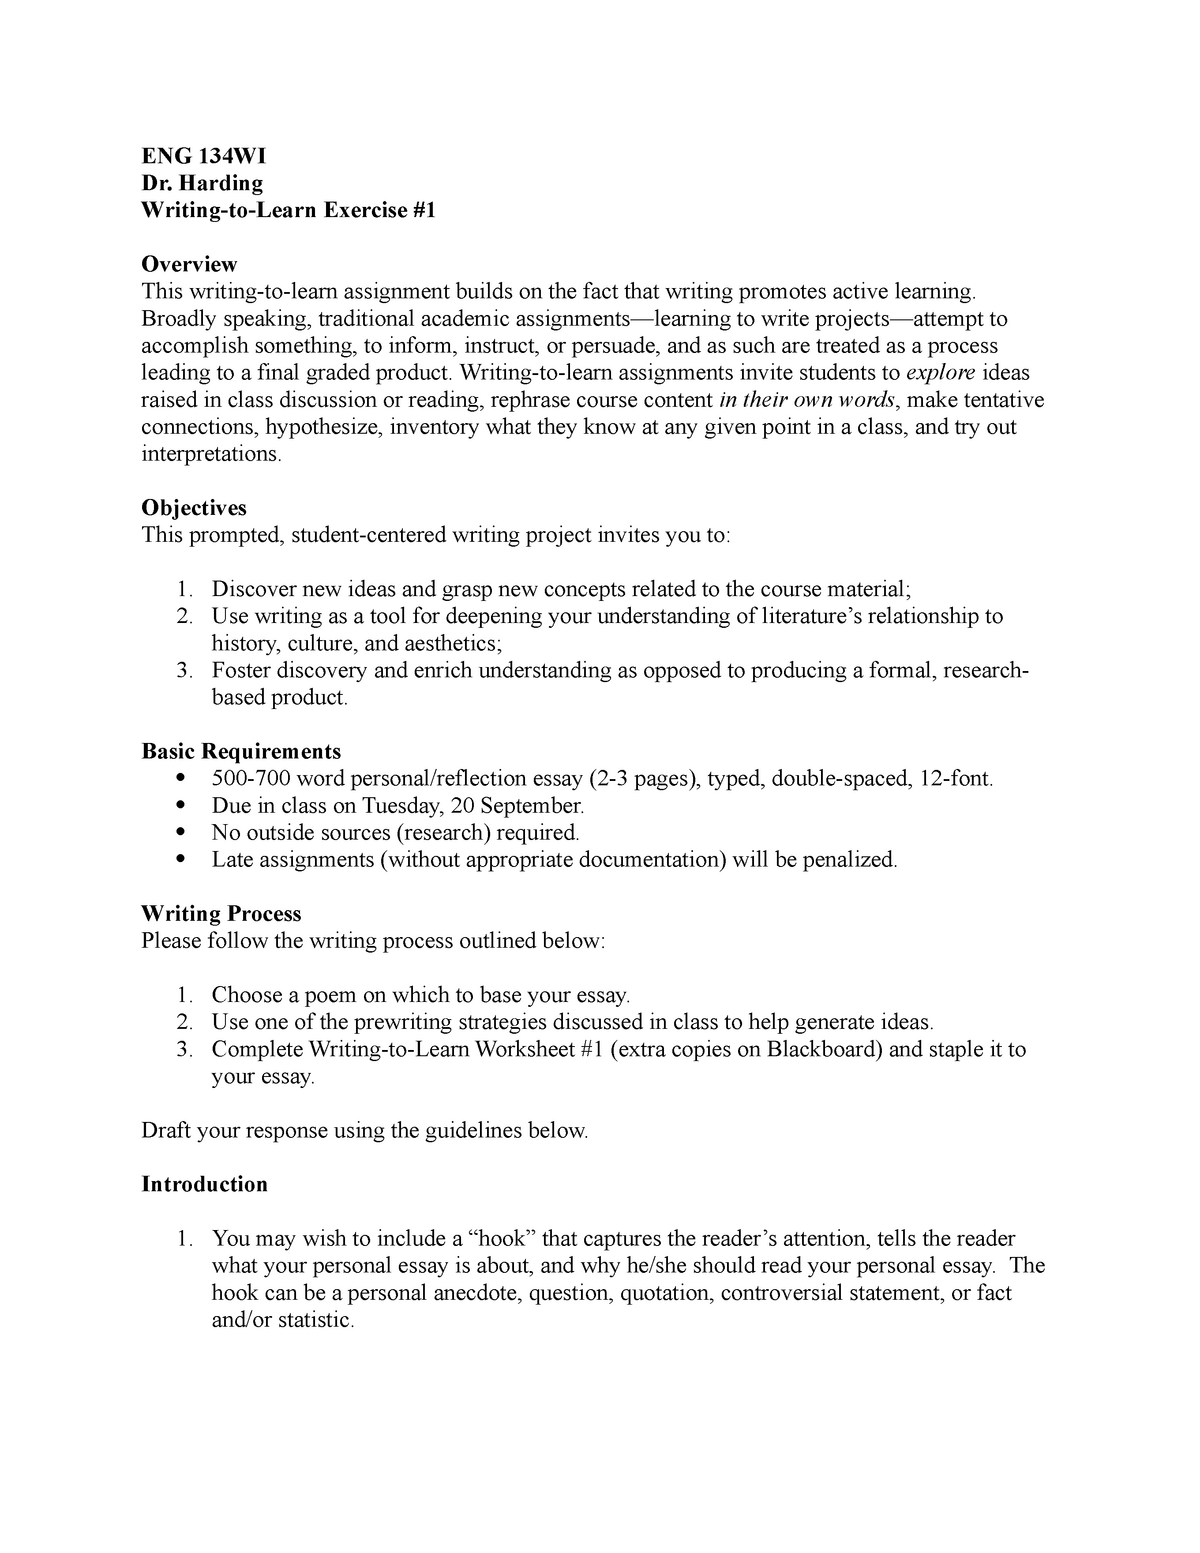 Writing To Learn 1 Assignment Sheet 2 Studocu